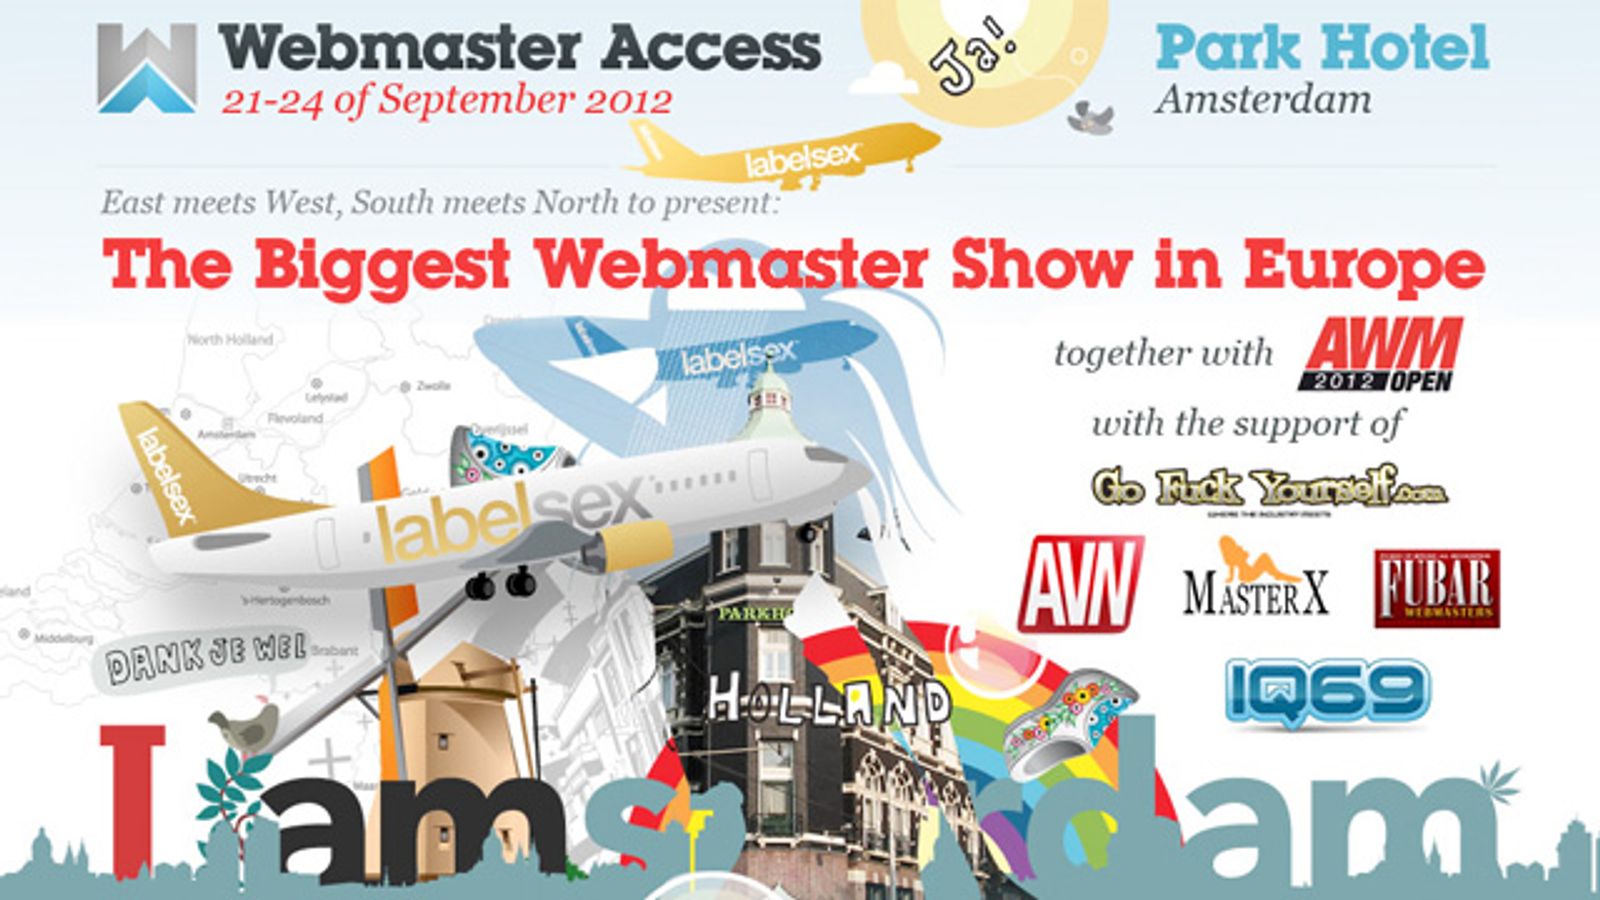 Webmaster Access Returns to Park Hotel Amsterdam, Sept. 21-24